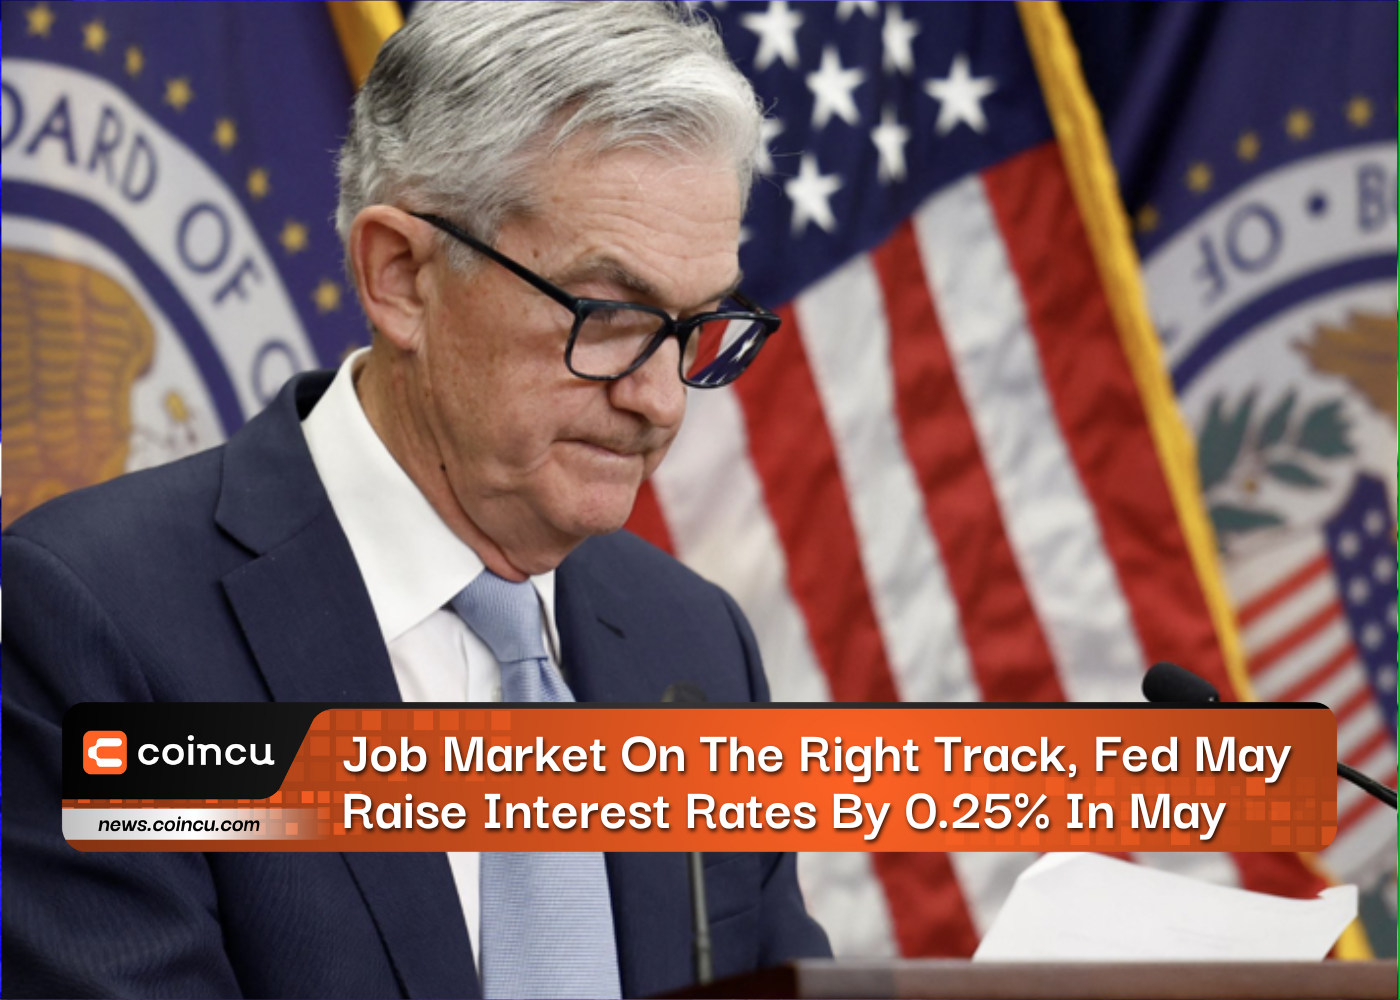 Job Market On The Right Track, Fed May Raise Interest Rates By 0.25% In May